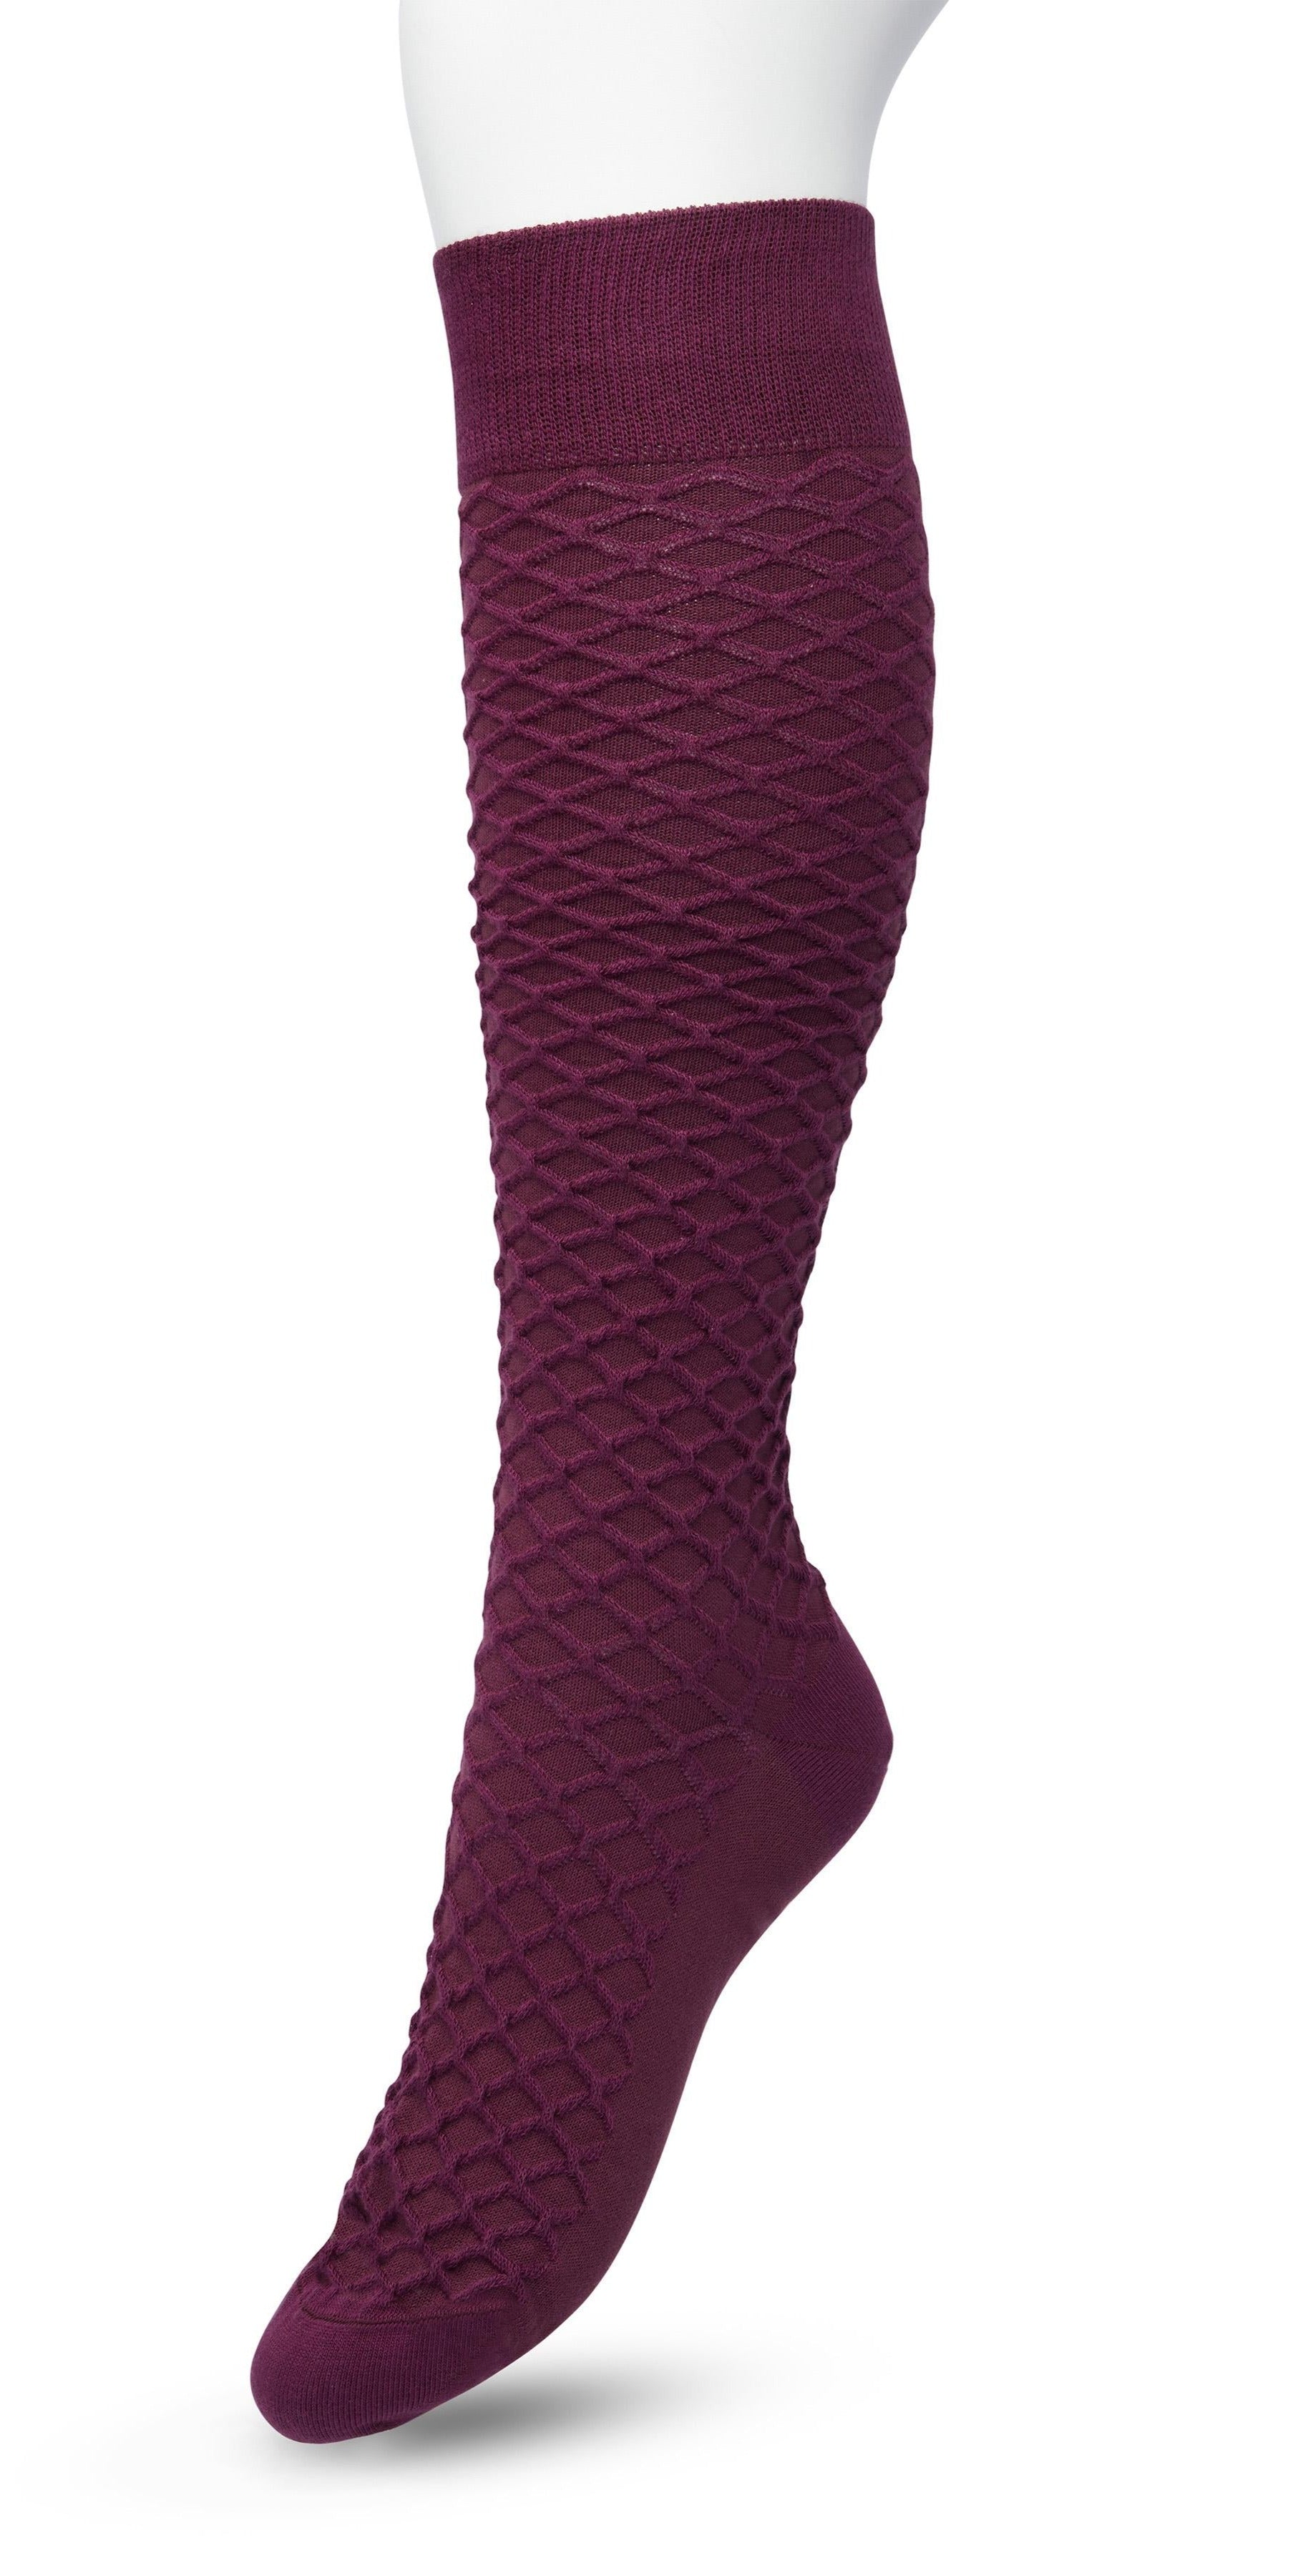 Bonnie Doon BP211506 Cable Knee-highs - Dark Purple (crushed violets) soft and warm knitted knee-high socks with a criss-cross diamond textured pattern